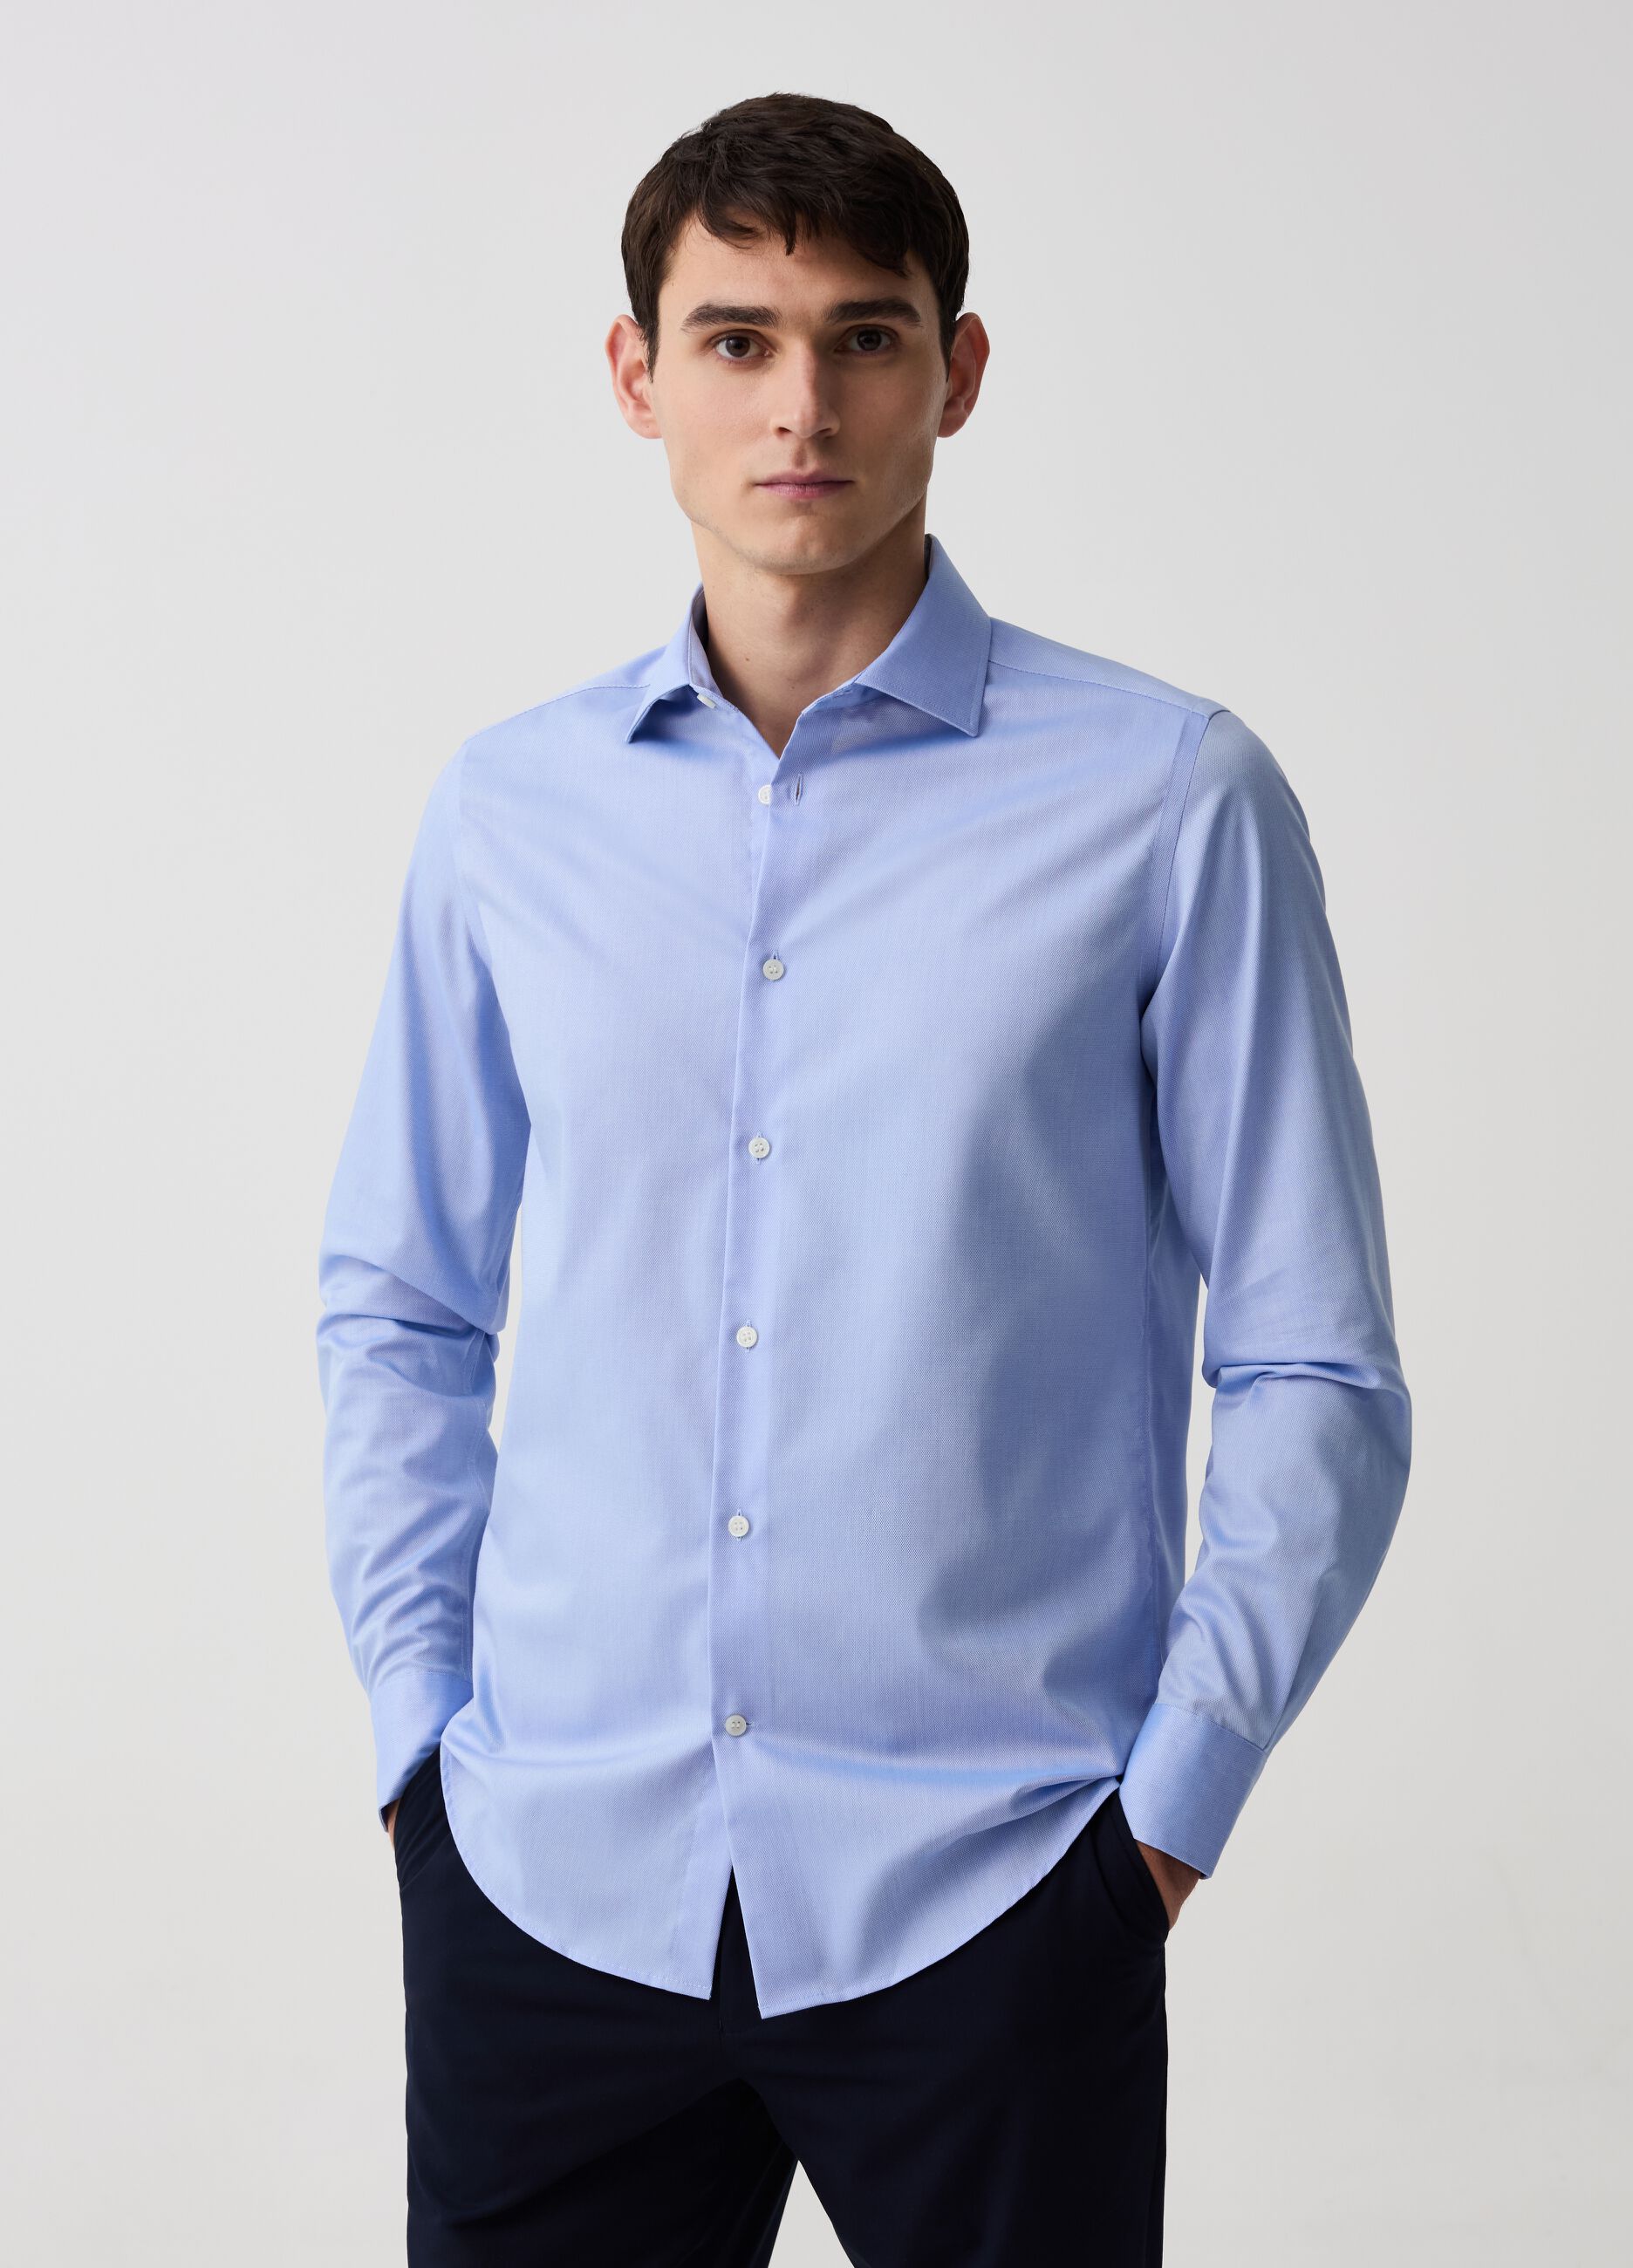 Slim-fit shirt in no-iron Oxford cotton